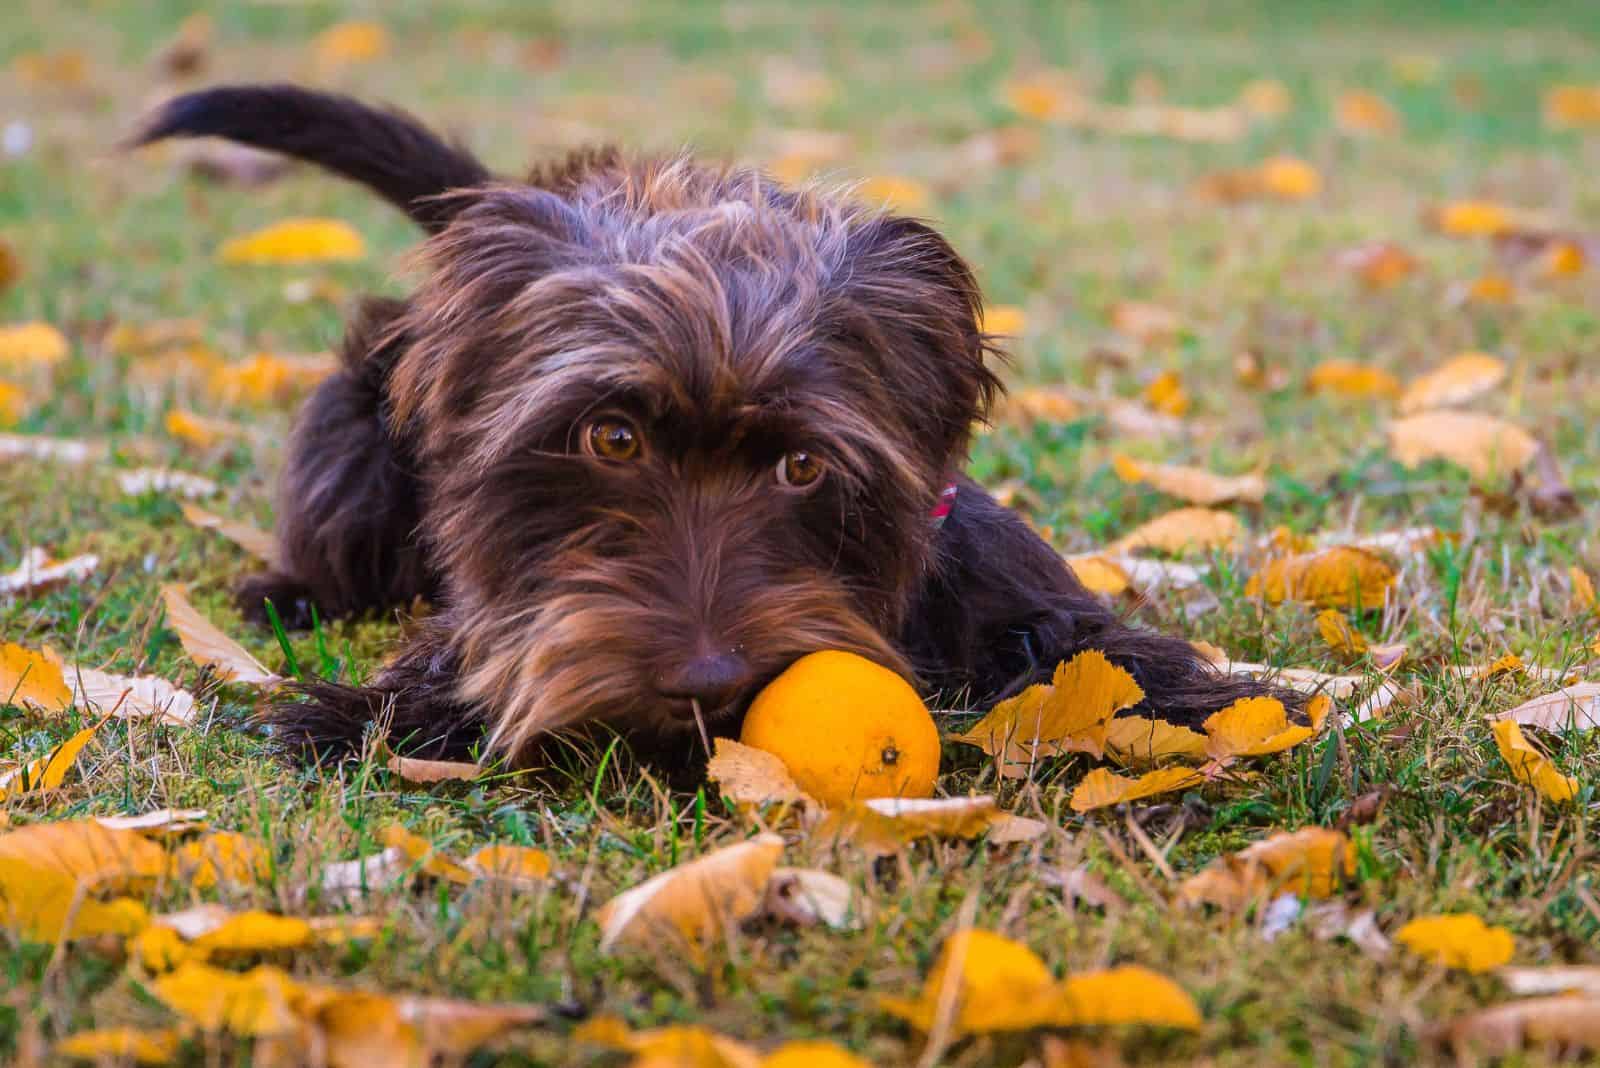 Schnauzer Dachshund Mix lies in the grass and plays with a tangerine